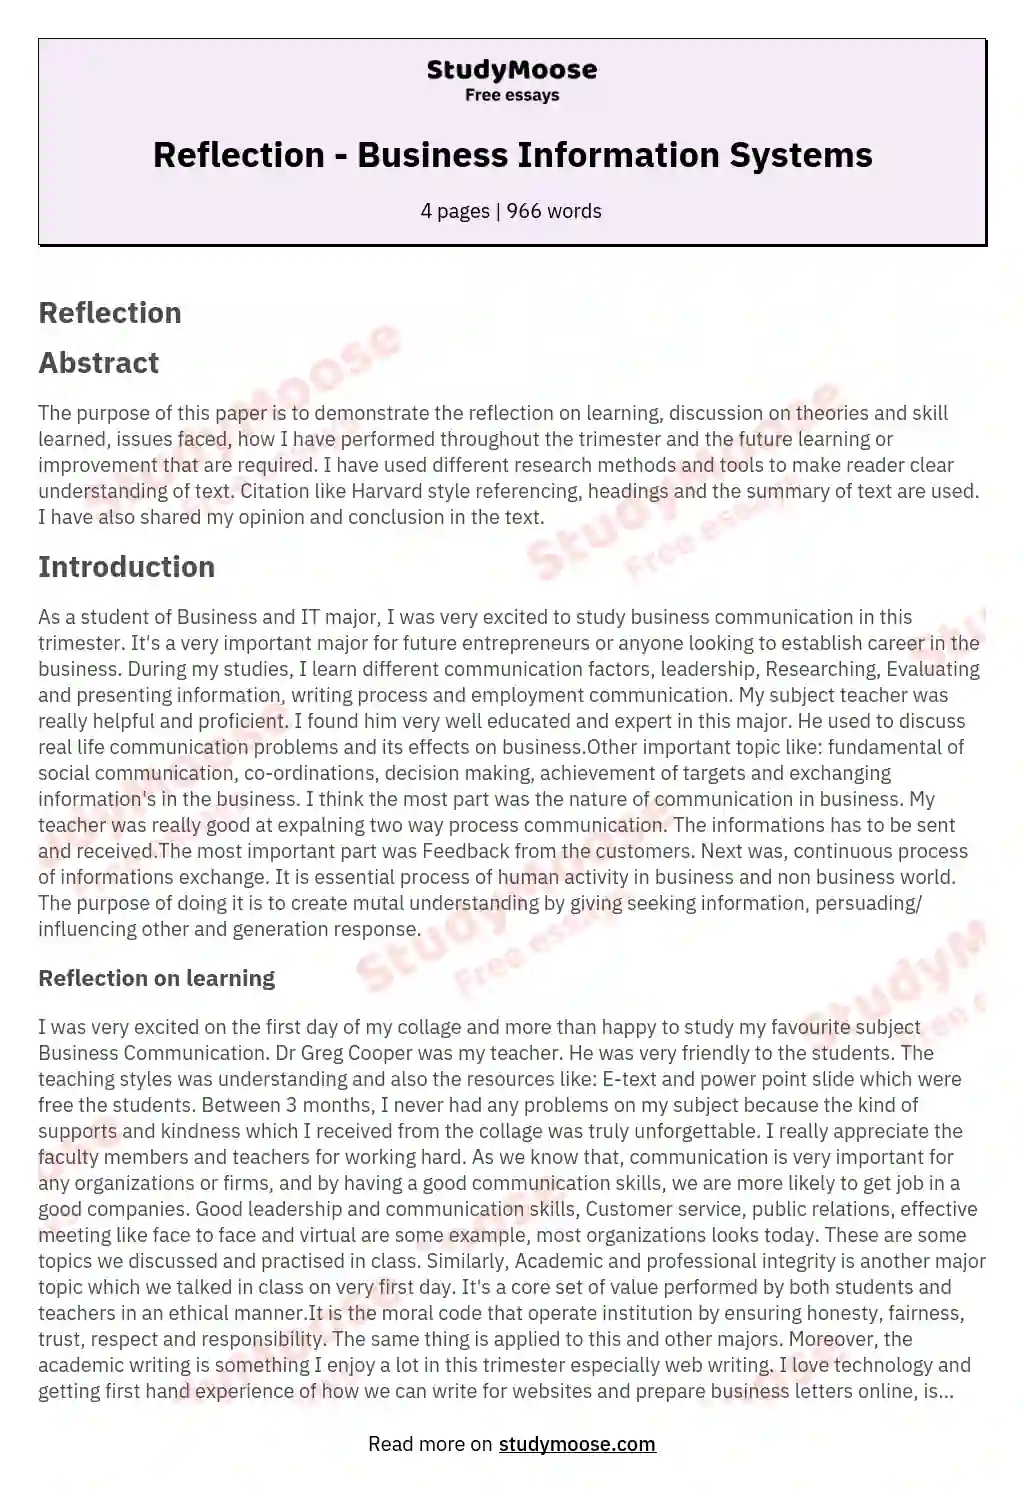 career reflection paper example